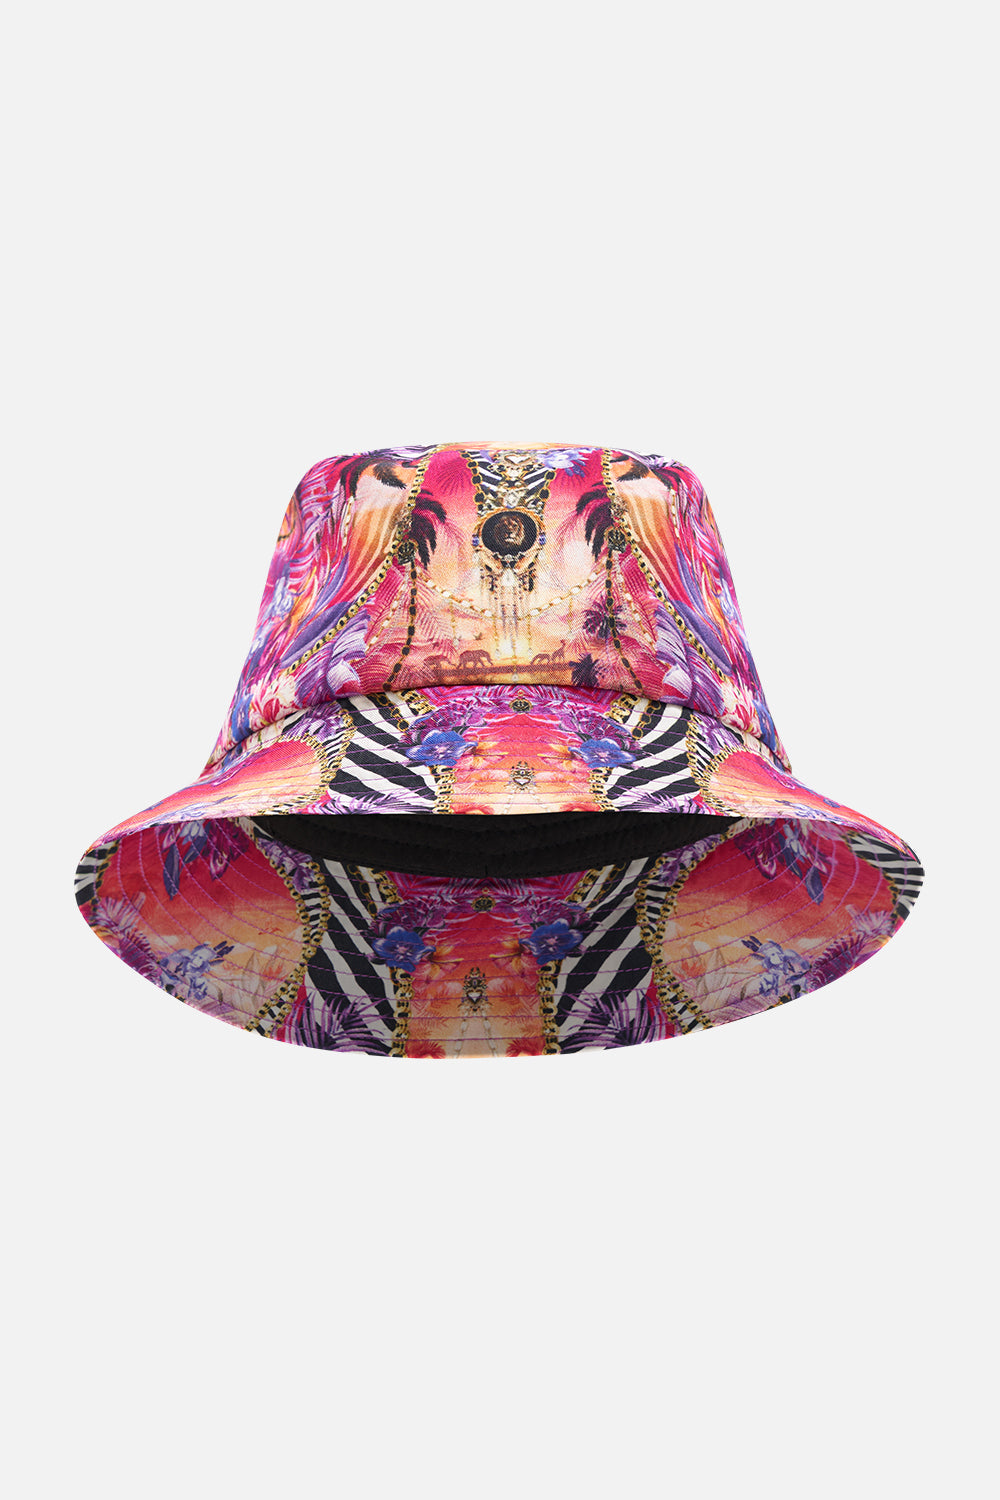 Product view of CAMILLA tropical print bucket hat in Wild Loving print 